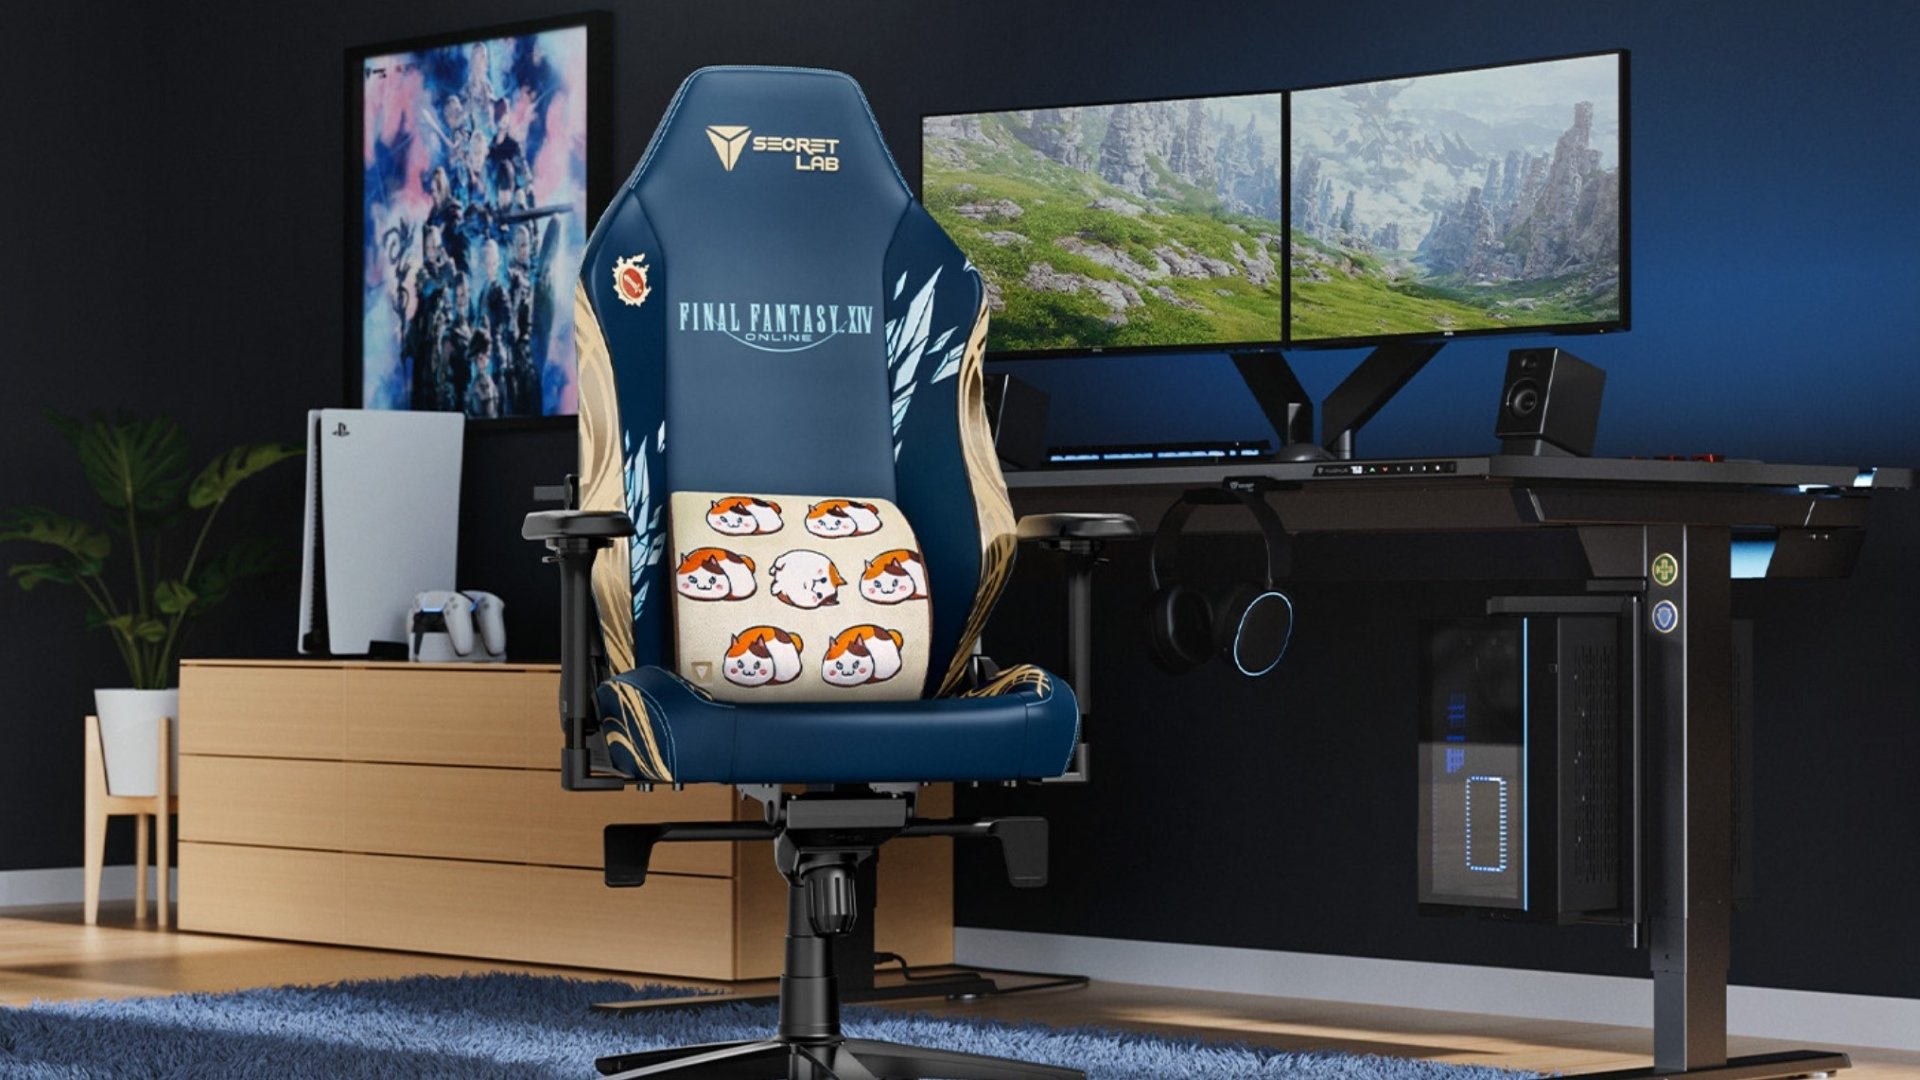 Final Fantasy XIV and Secret Lab partnership for the MMO's 10th Anniversary, a gamer chair designed like the Crystal Tower